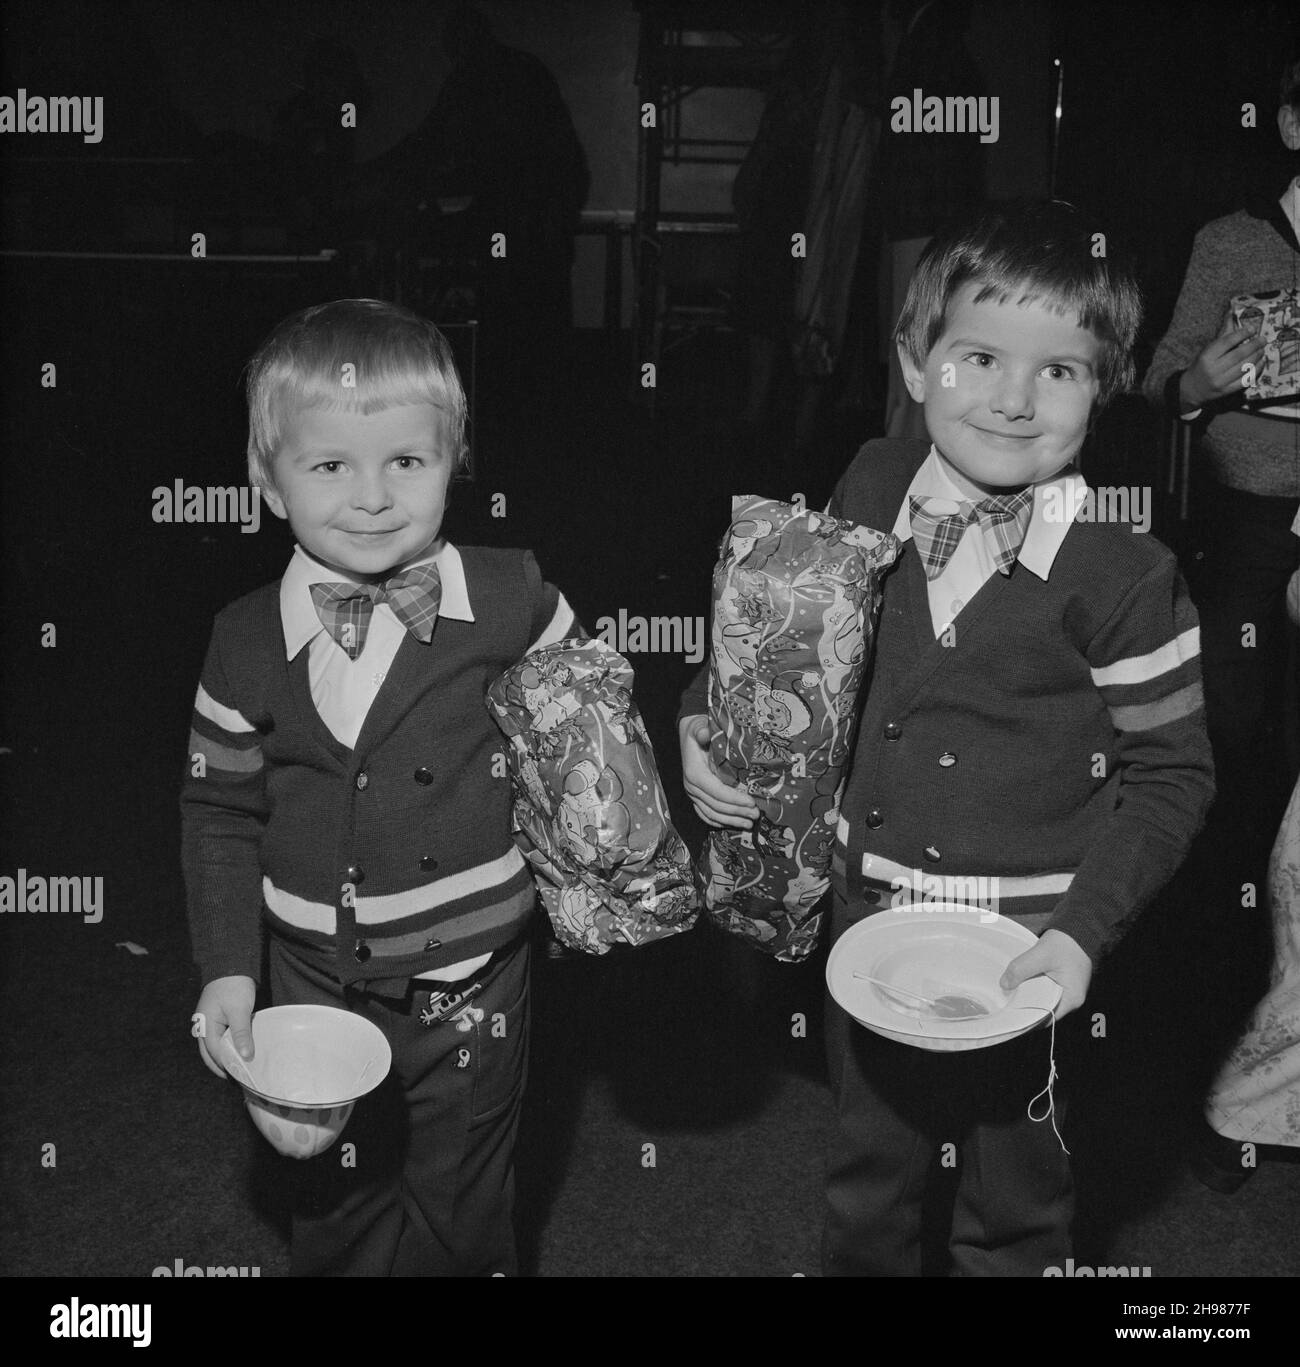 John Laing and Son Limited, Page Street, Mill Hill, Barnet, London, 16/12/1978. Two young boys in matching outfits holding presents and party hats at the Laing children's Christmas party at Mill Hill. Stock Photo